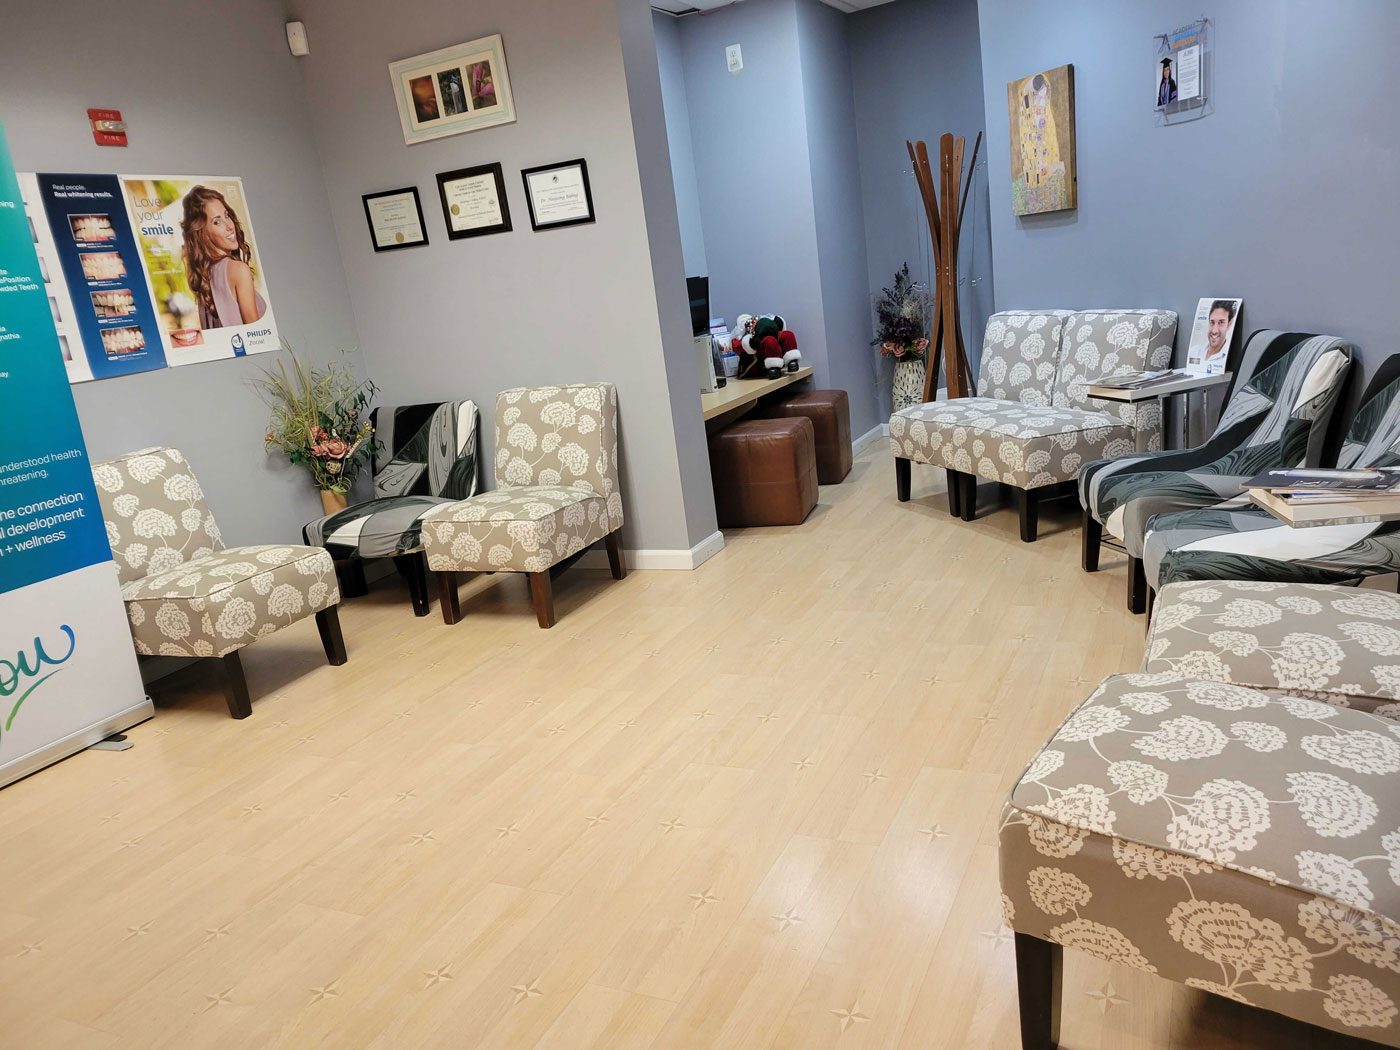 Interior view of JB Dental's office, with a modern and welcoming reception area with comfortable chairs, stylish decor, and a clean, professional atmosphere.